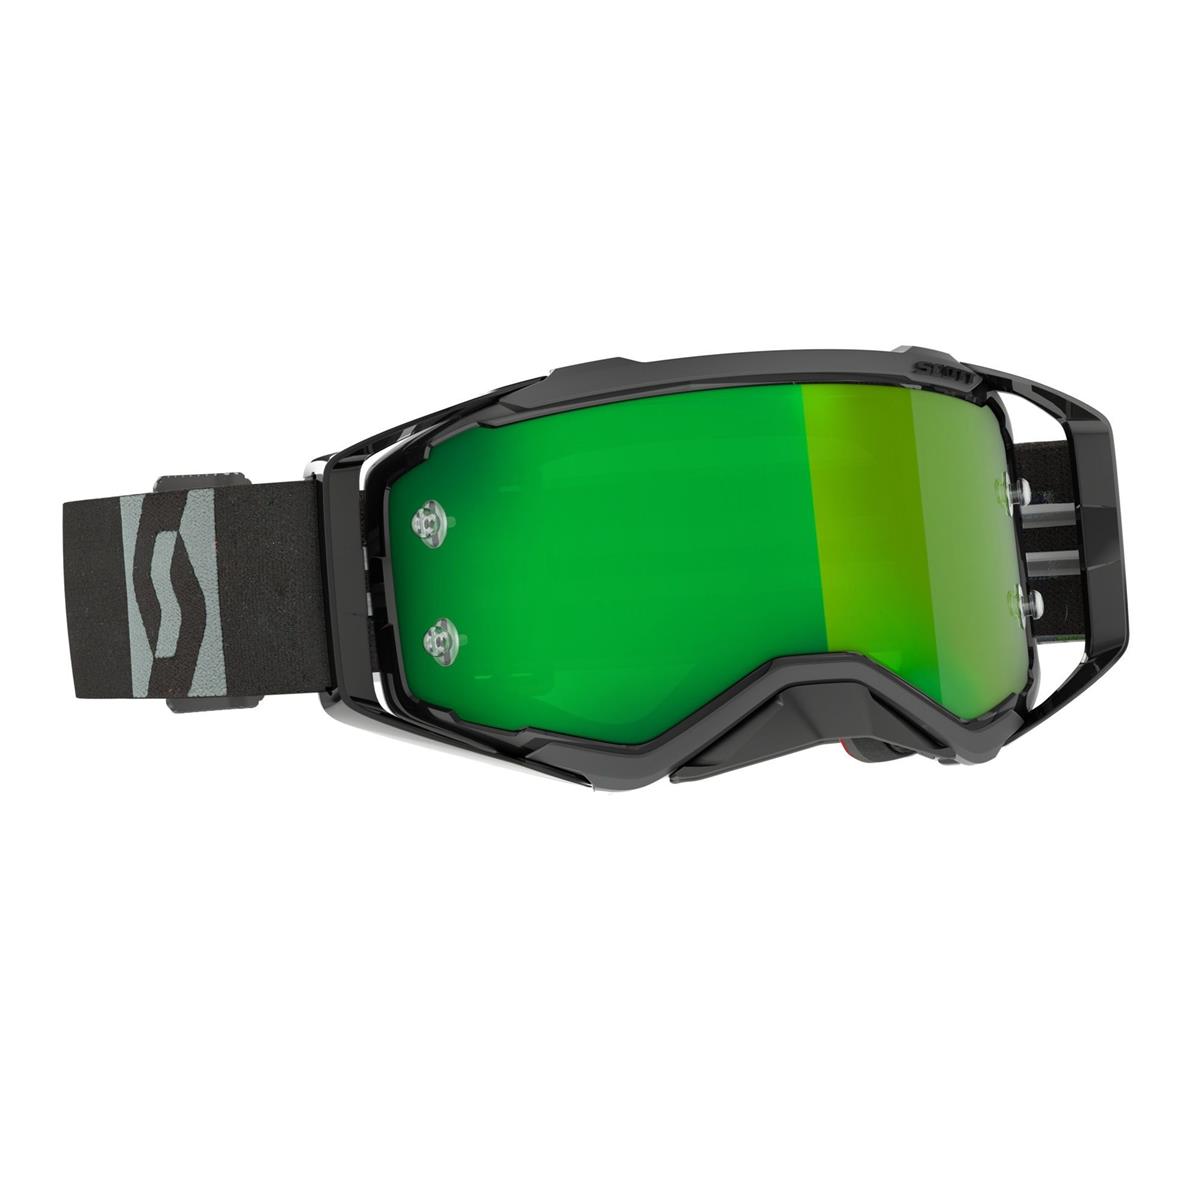 Prospect Mask Camo Grey/Black With Chrome Works Green Lens